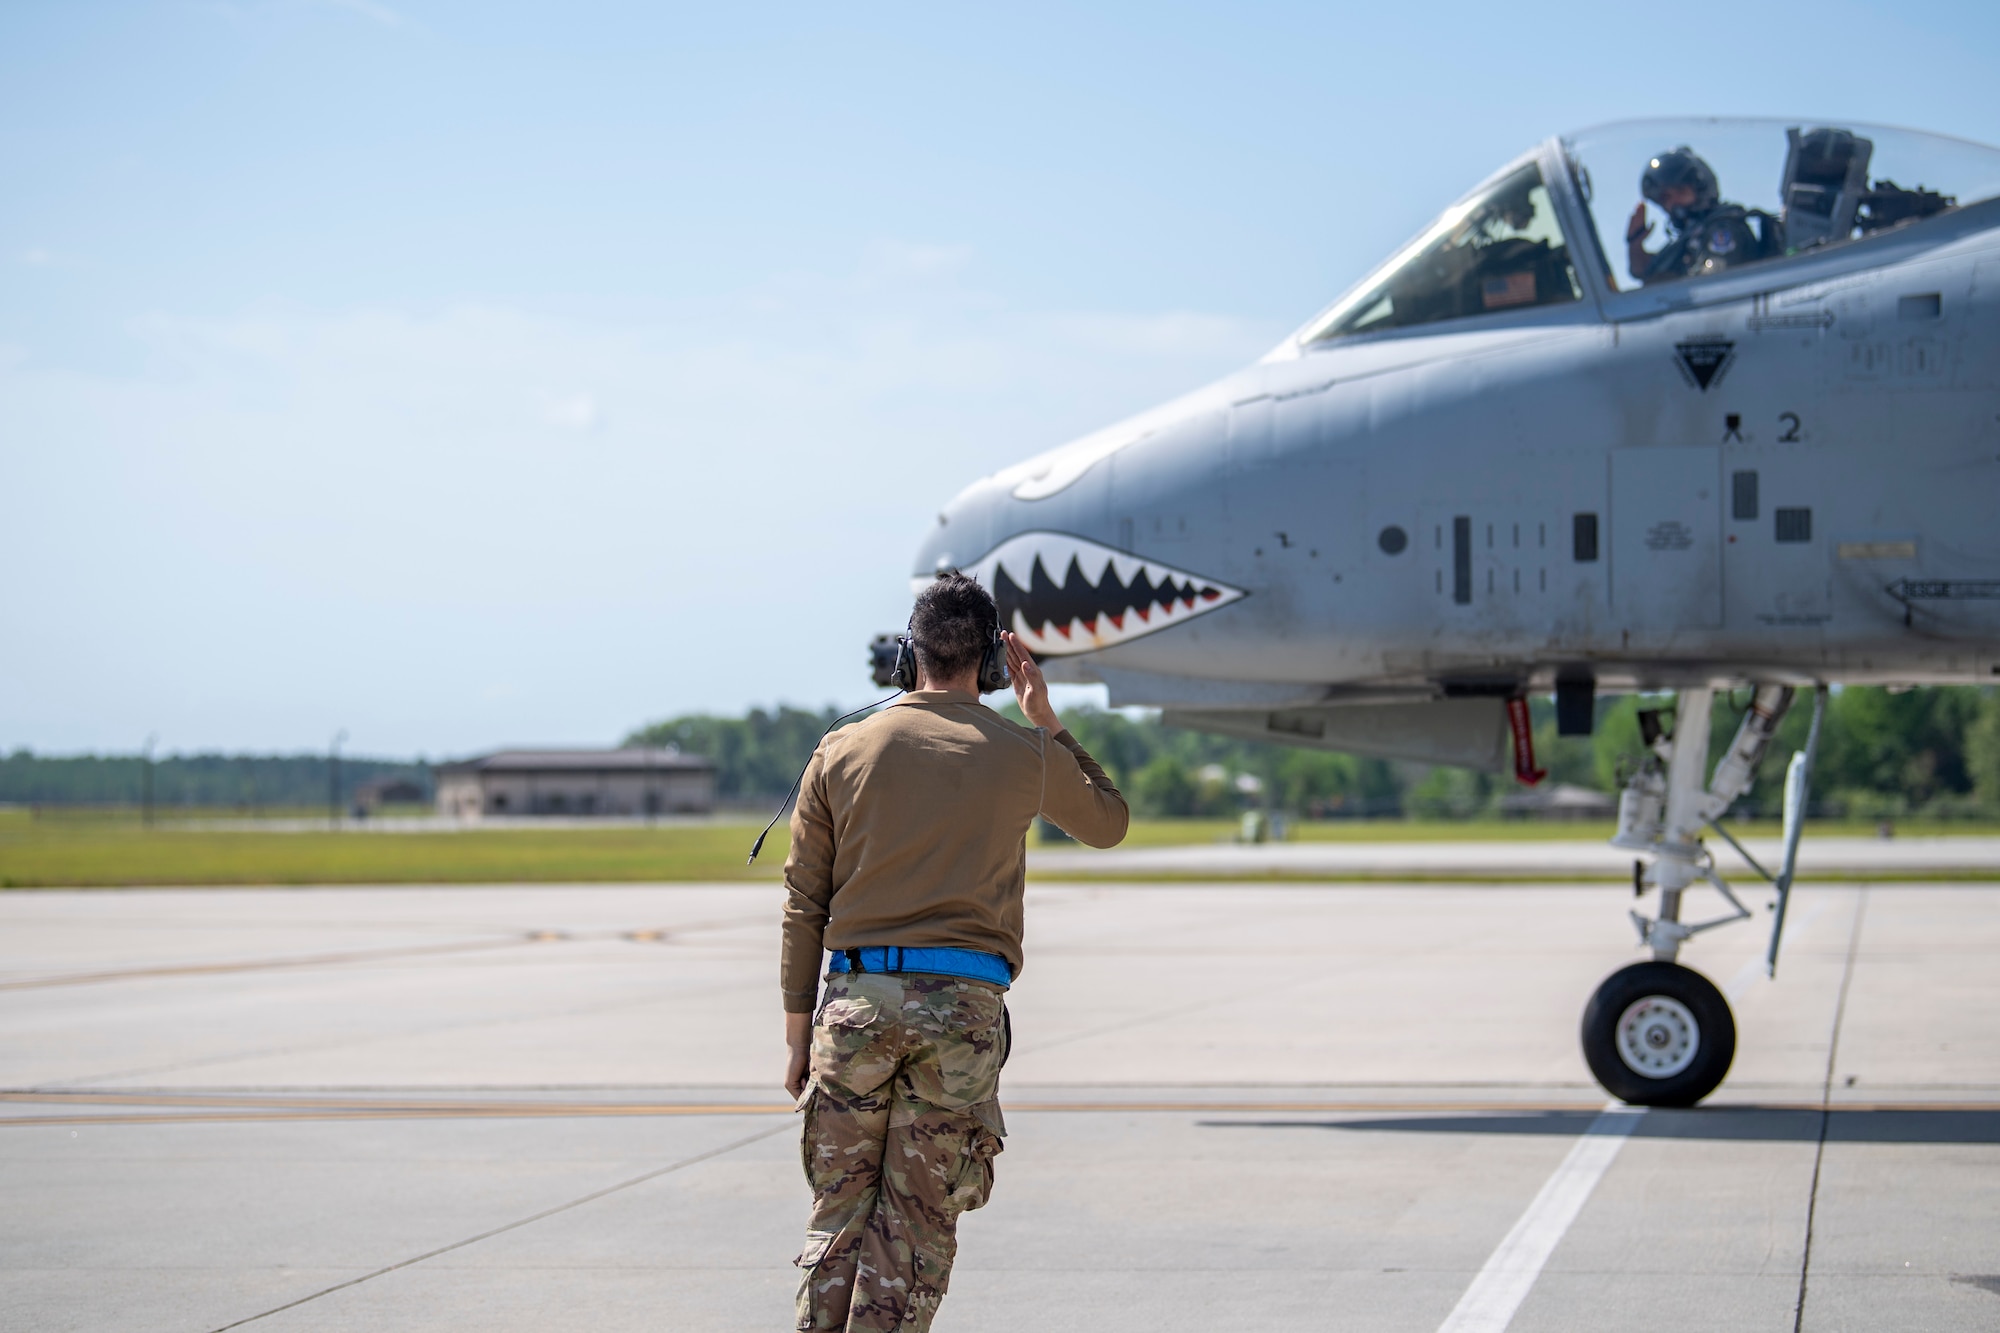 A U.S. Air Force crew chief assigned to the 23rd Maintenance Group salutes an A-10C Thunderbolt II pilot during Exercise Ready Tiger 24-1 at Moody Air Force Base, Georgia, April 9, 2024. Crew chiefs perform various responsibilities, including conducting routine preventative and scheduled maintenance procedures, analyzing and maintaining computer-based programs, supervising teams, conducting technical inspections, and performing launch, recovery, and turnaround operations. The Ready Tiger 24-1 exercise evaluators will assess the 23rd Wing's proficiency in employing decentralized command and control to fulfil air tasking orders across geographically dispersed areas amid communication challenges. (U.S. Air Force photo by 2nd Lt. Benjamin Williams).